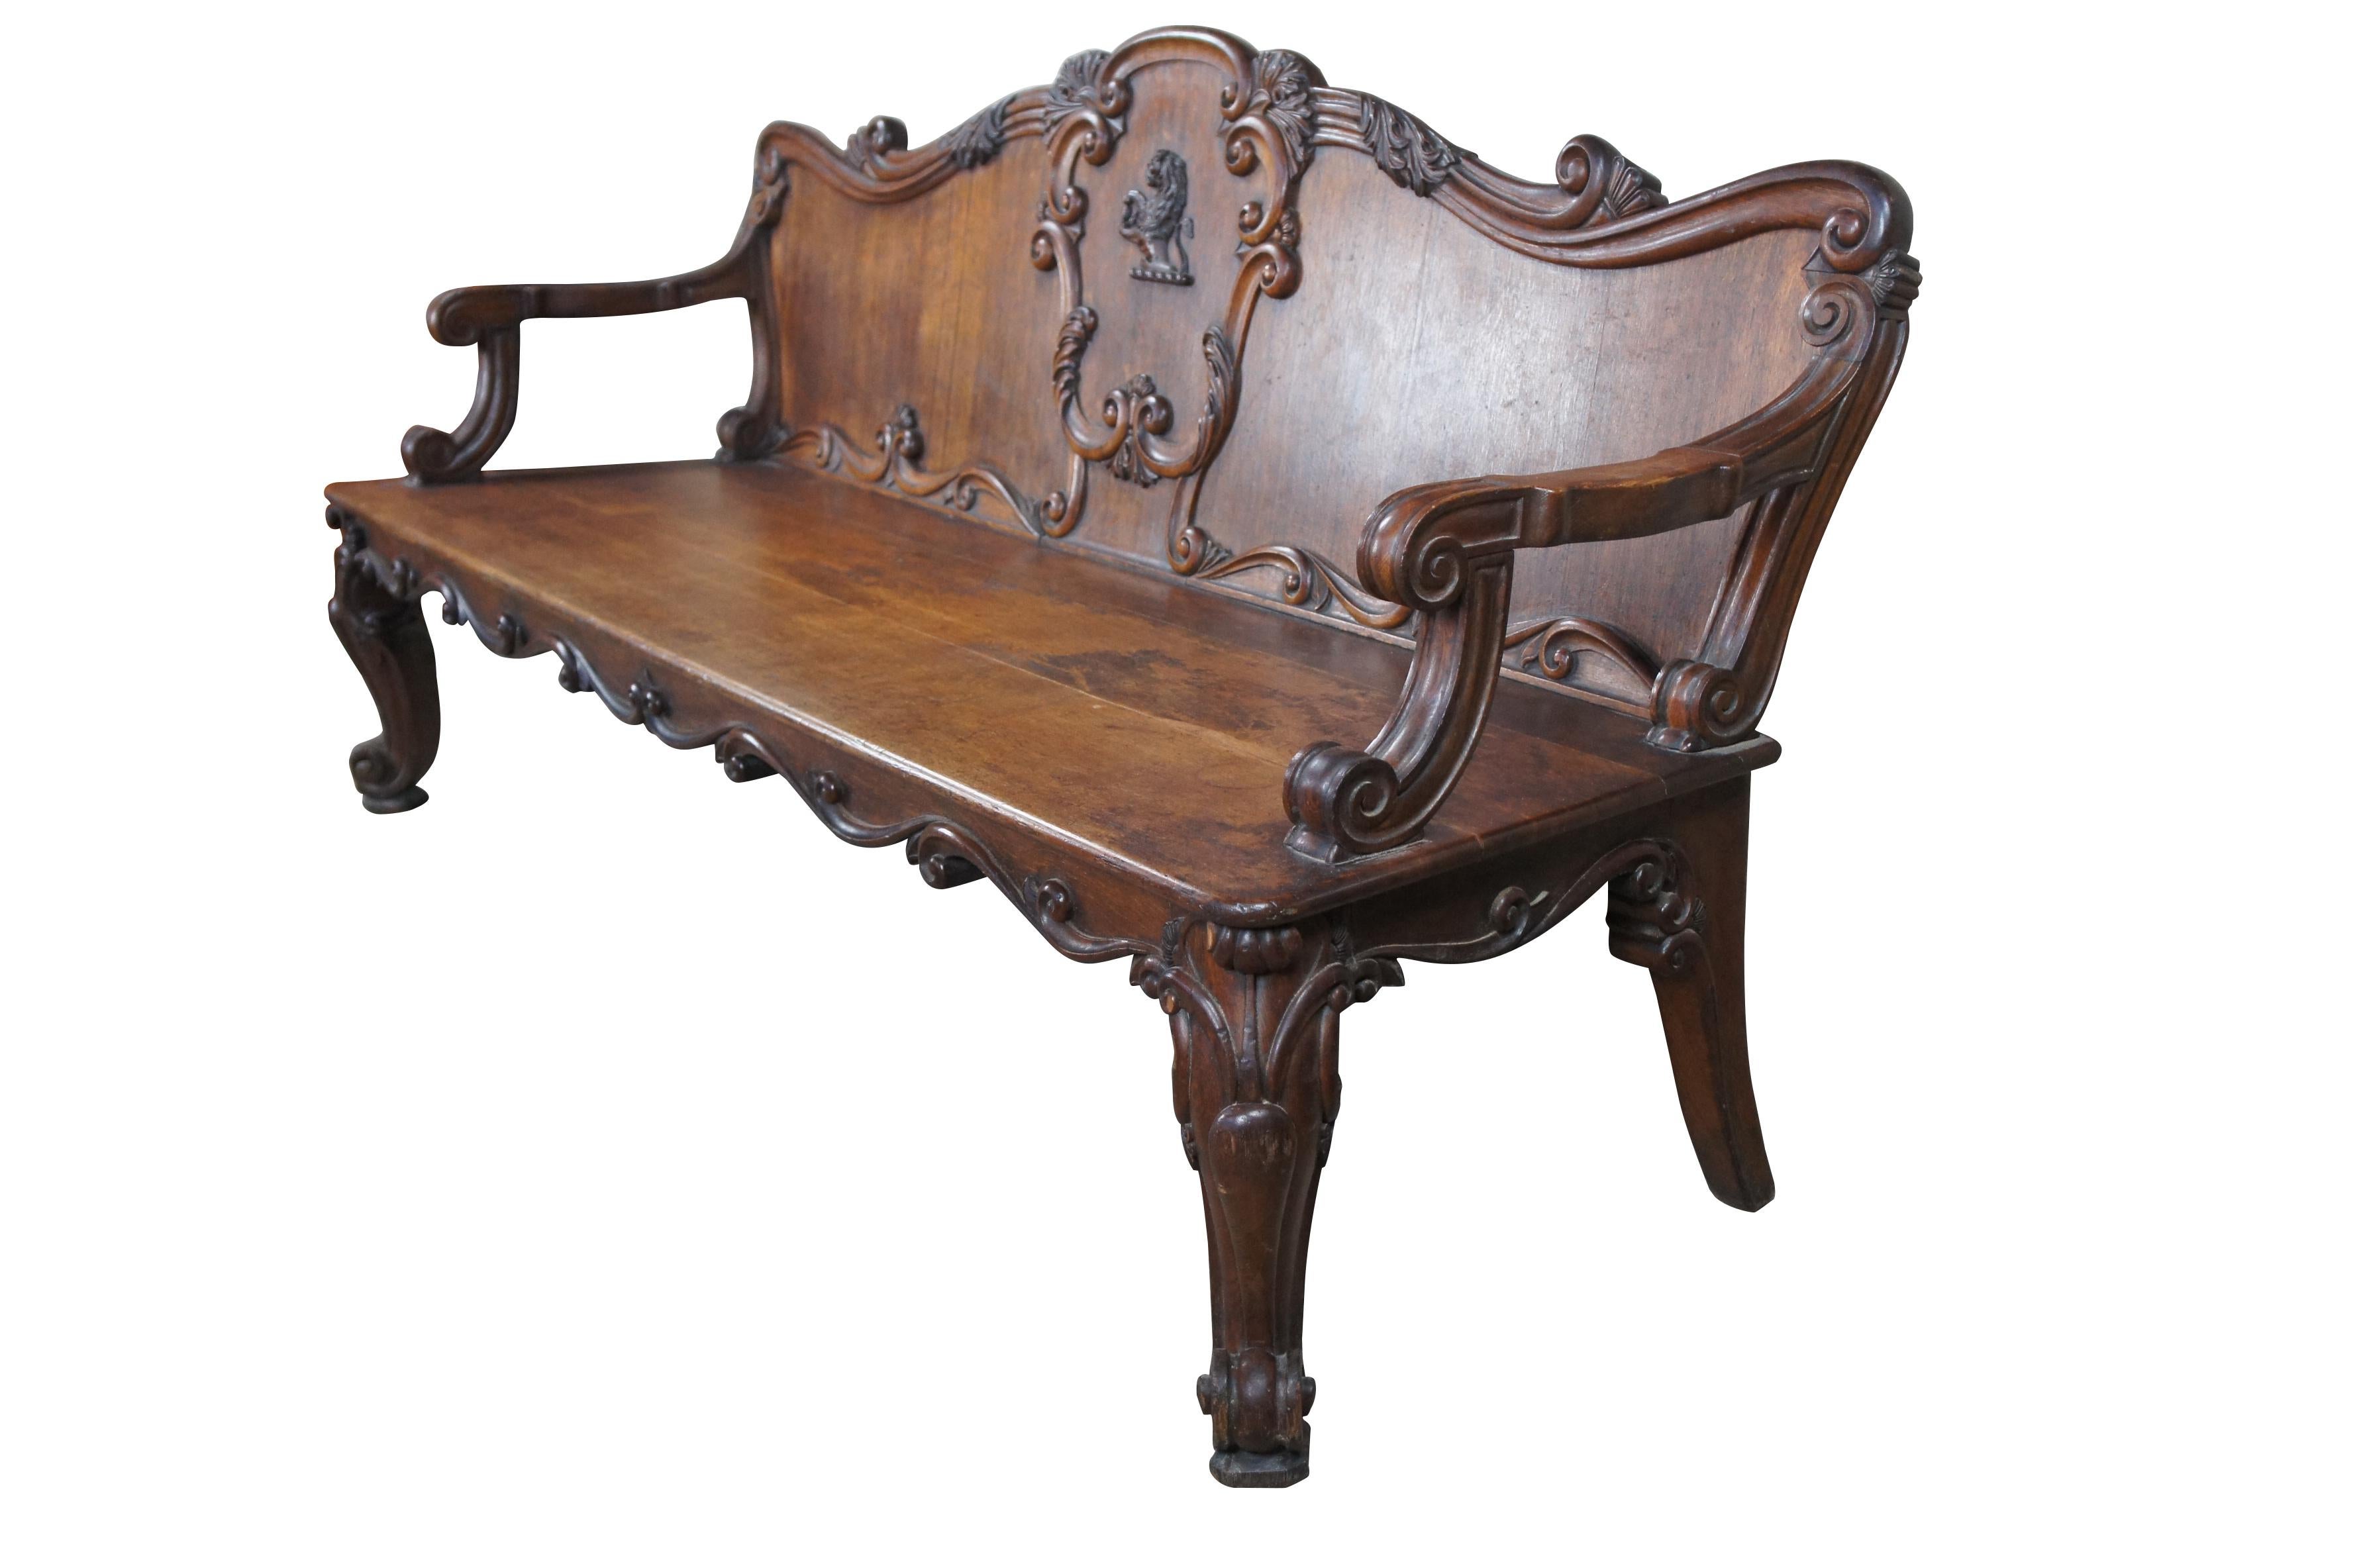 A rare and impressive hall bench / settle from Moreton Hall in Lancashire United Kingdom, circa 1830s.  Made of oak featuring serpentine hand carved form with lion passant holding an acorn, heavy acanthus leaf foliate and swags. The bench showcases